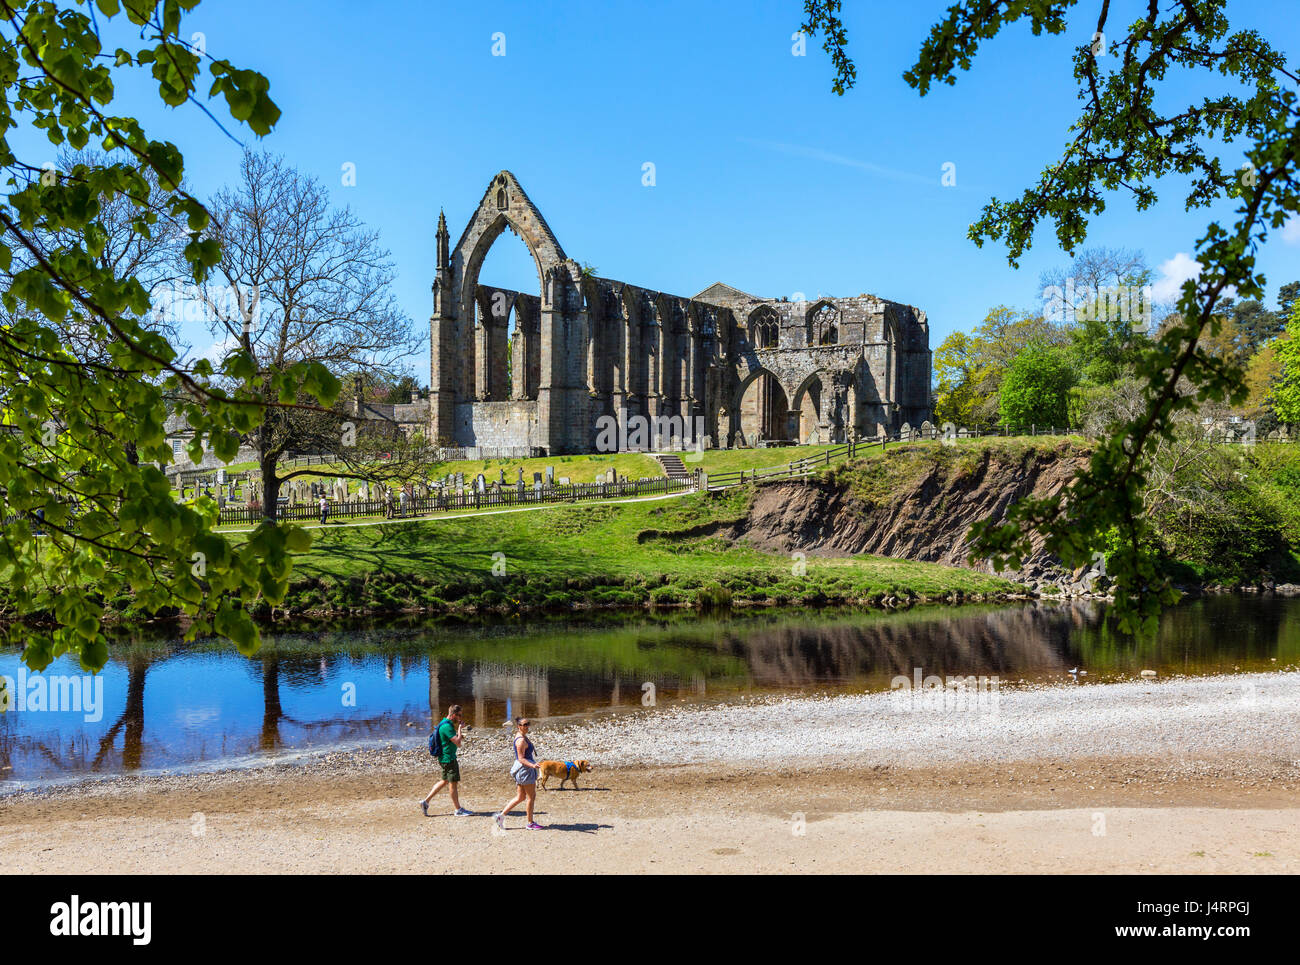 Bolton Priory, Bolton Abbey, Wharfedale, Yorkshire Dales National Park, North Yorkshire, England, UK Stockfoto